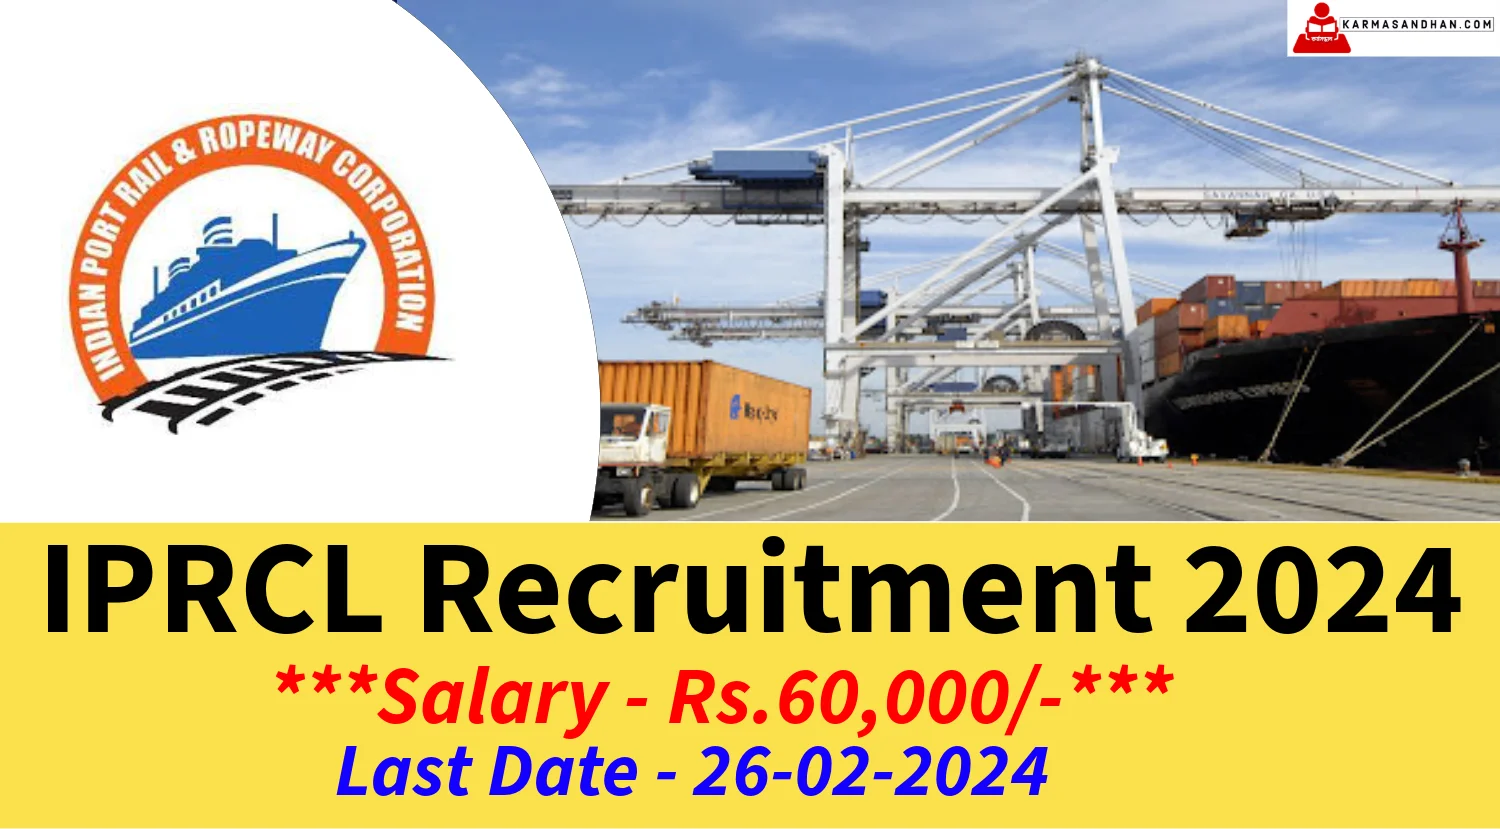 IPRCL Recruitment 2024 Notification out for Managerial Posts